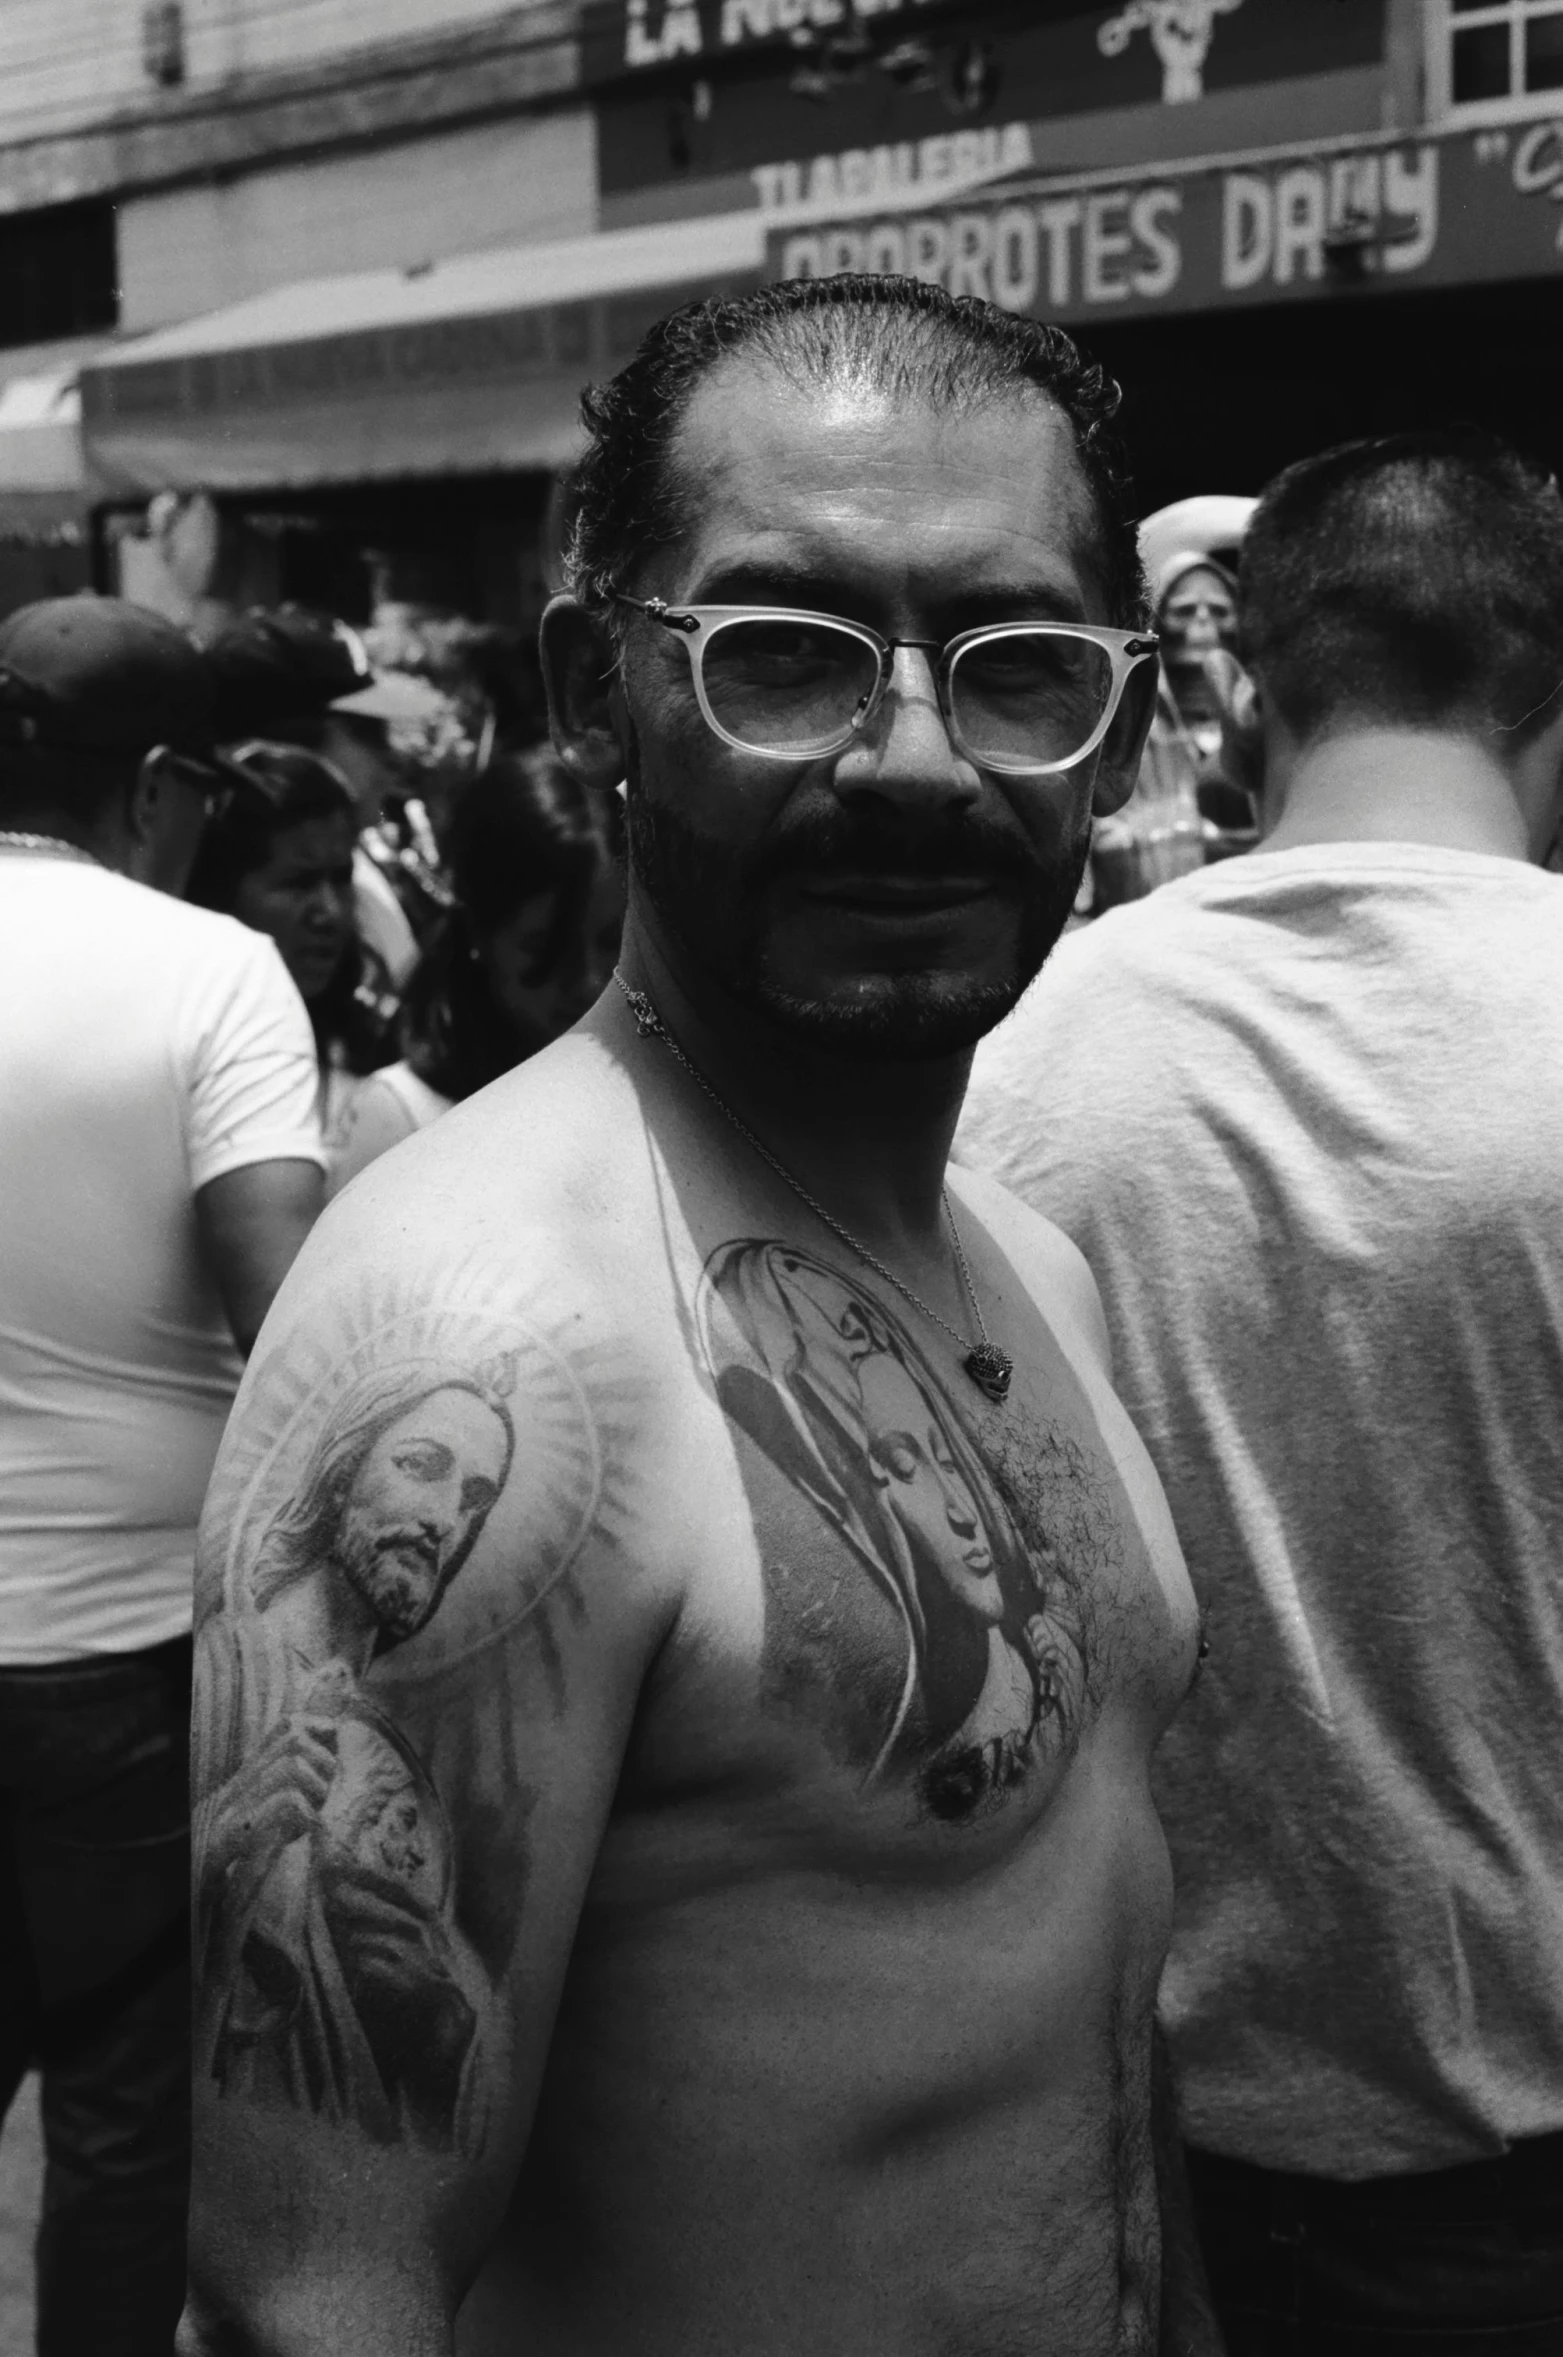 a man with tattoos standing in front of a crowd